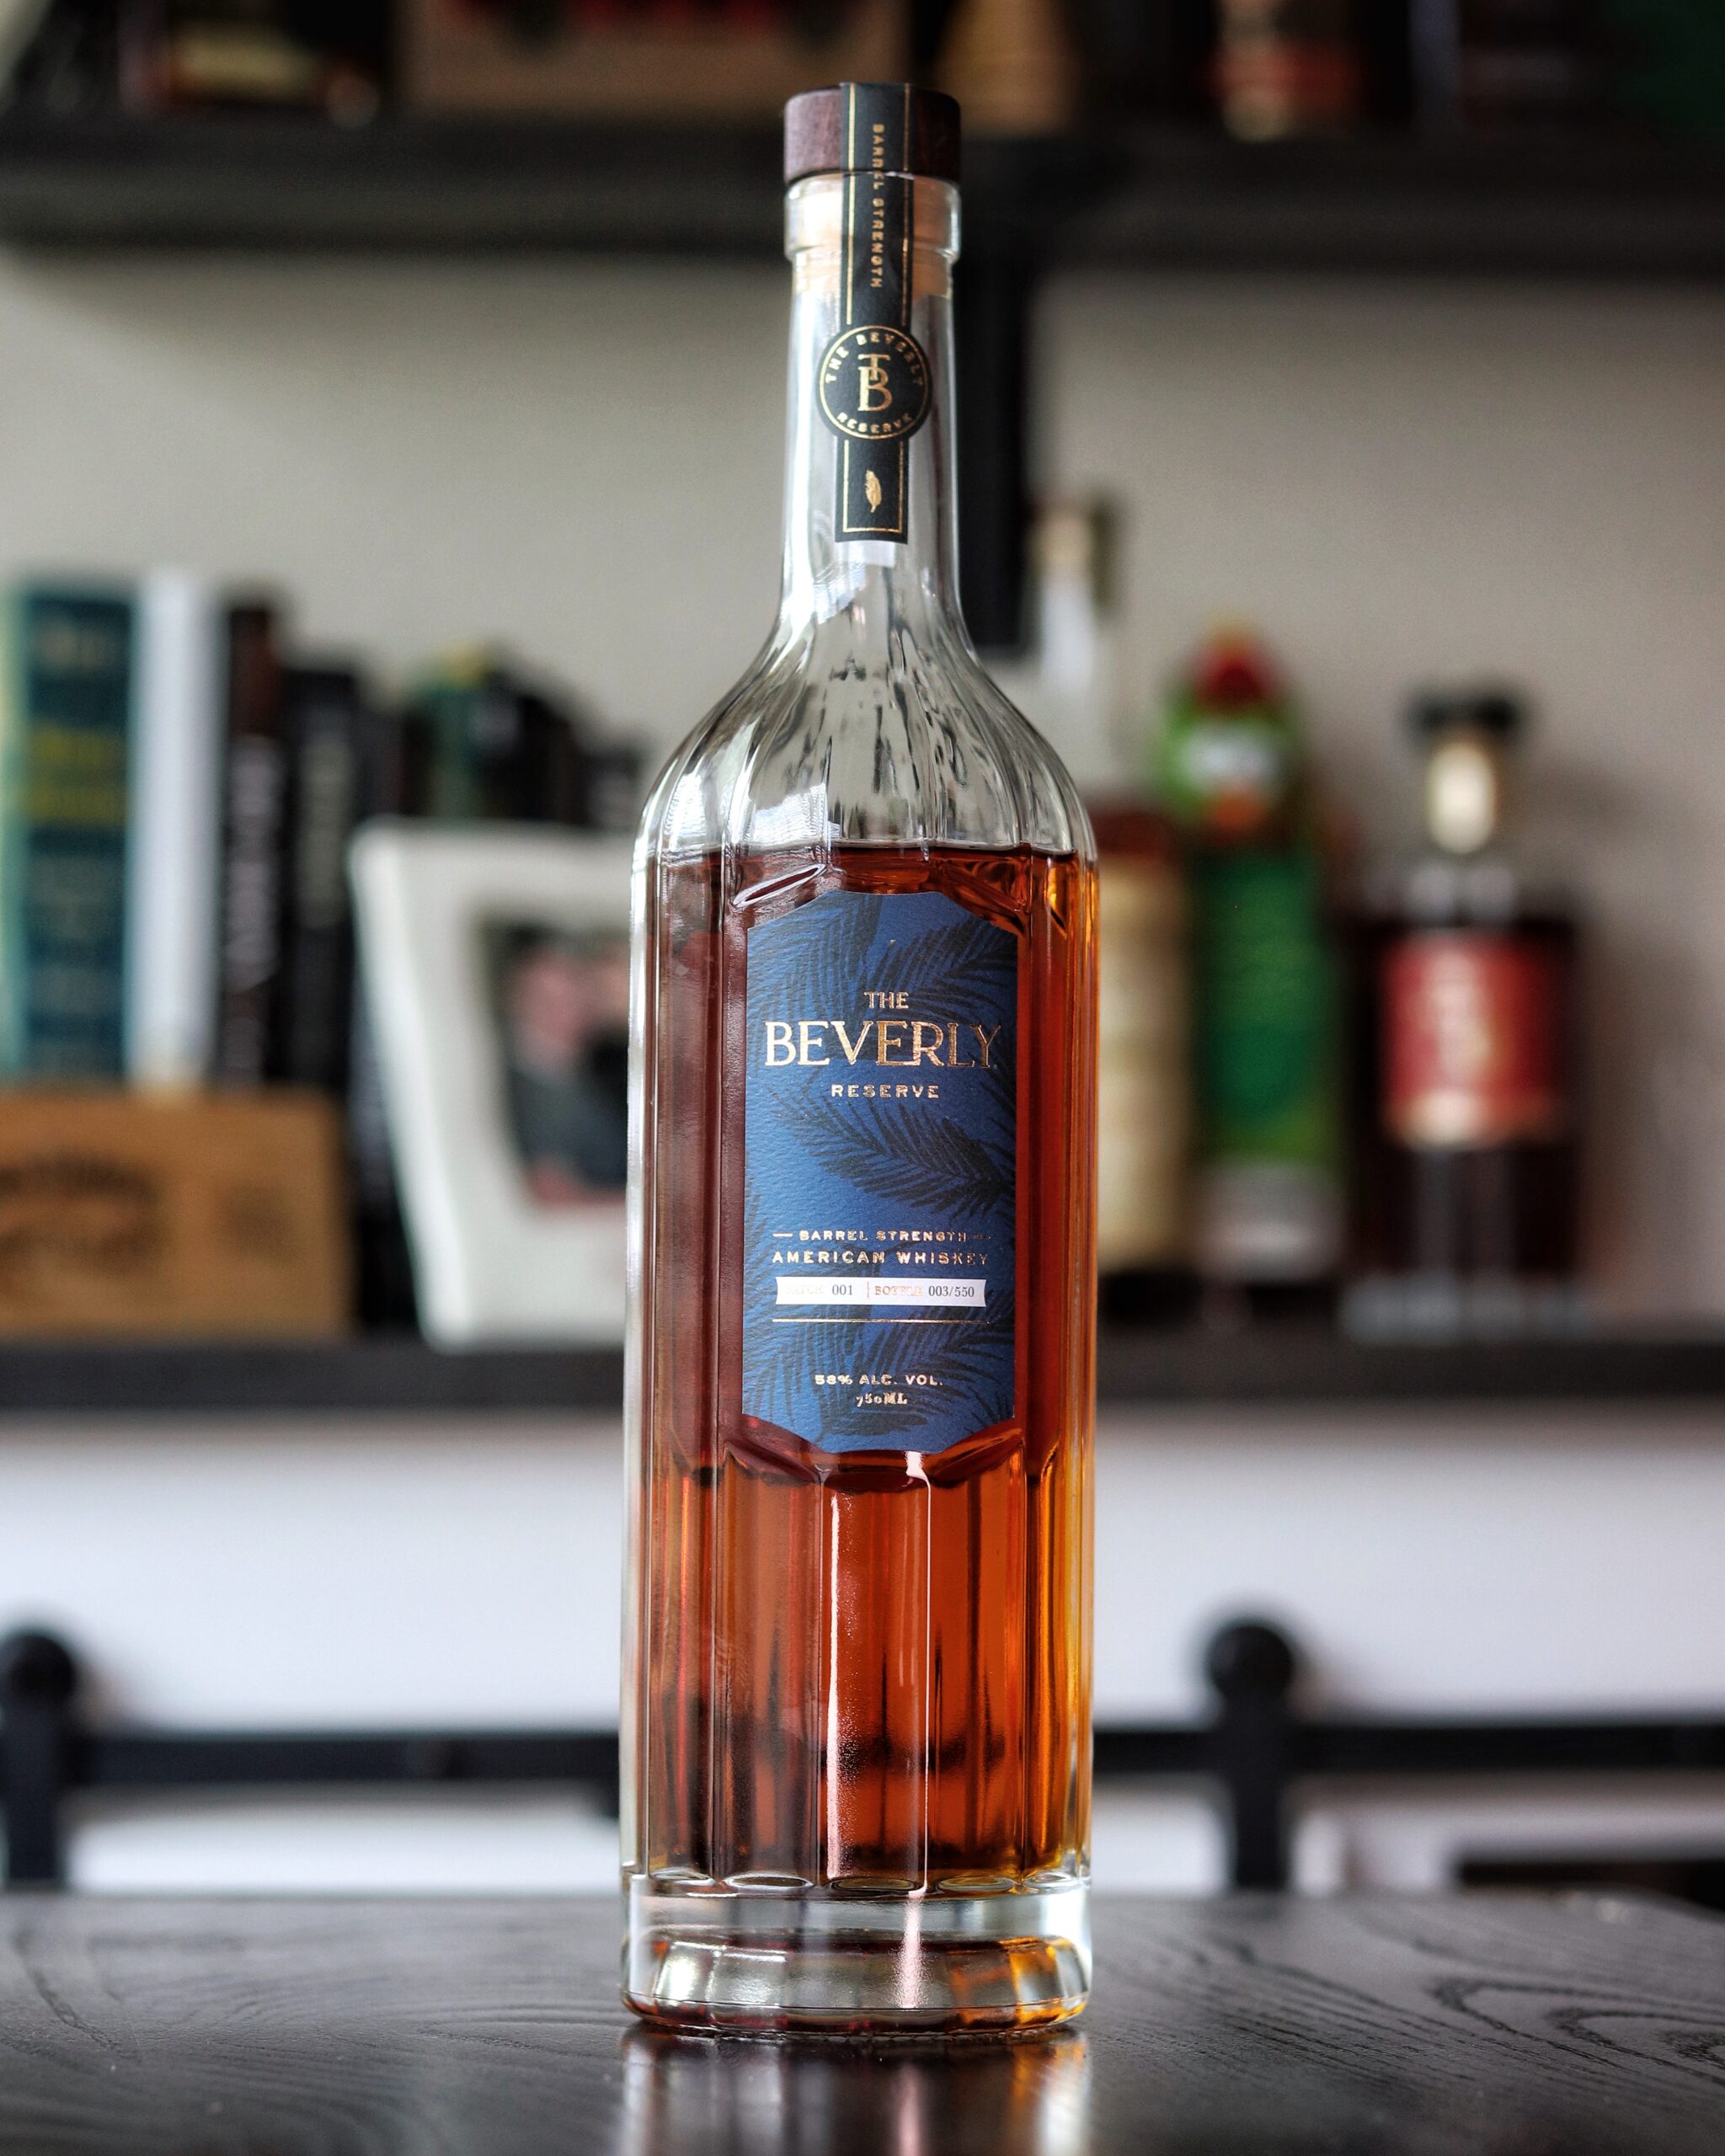 New Barrel Strength “The Beverly Reserve” American Whiskey Reviewed